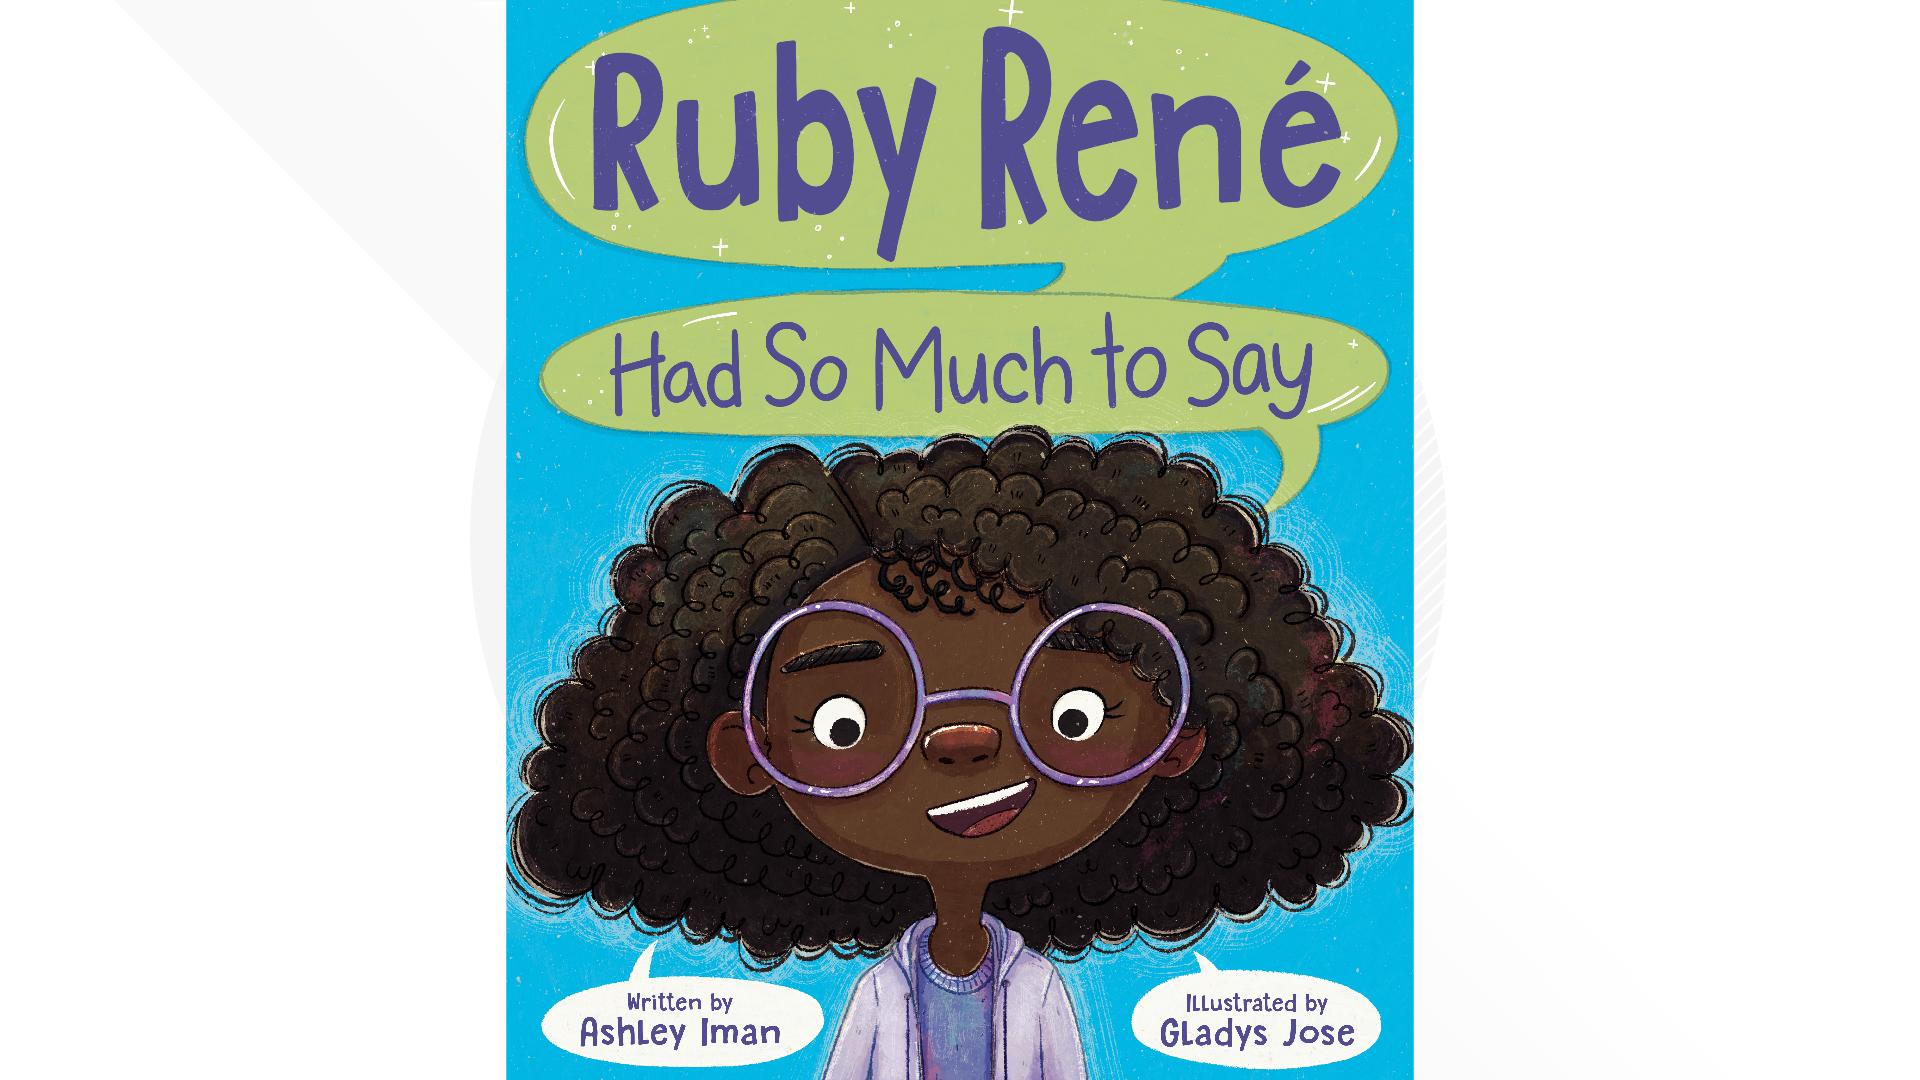 We speak to author and DC native, Ashley Iman, about her new kids' book 'Ruby René Had So Much to Say'.